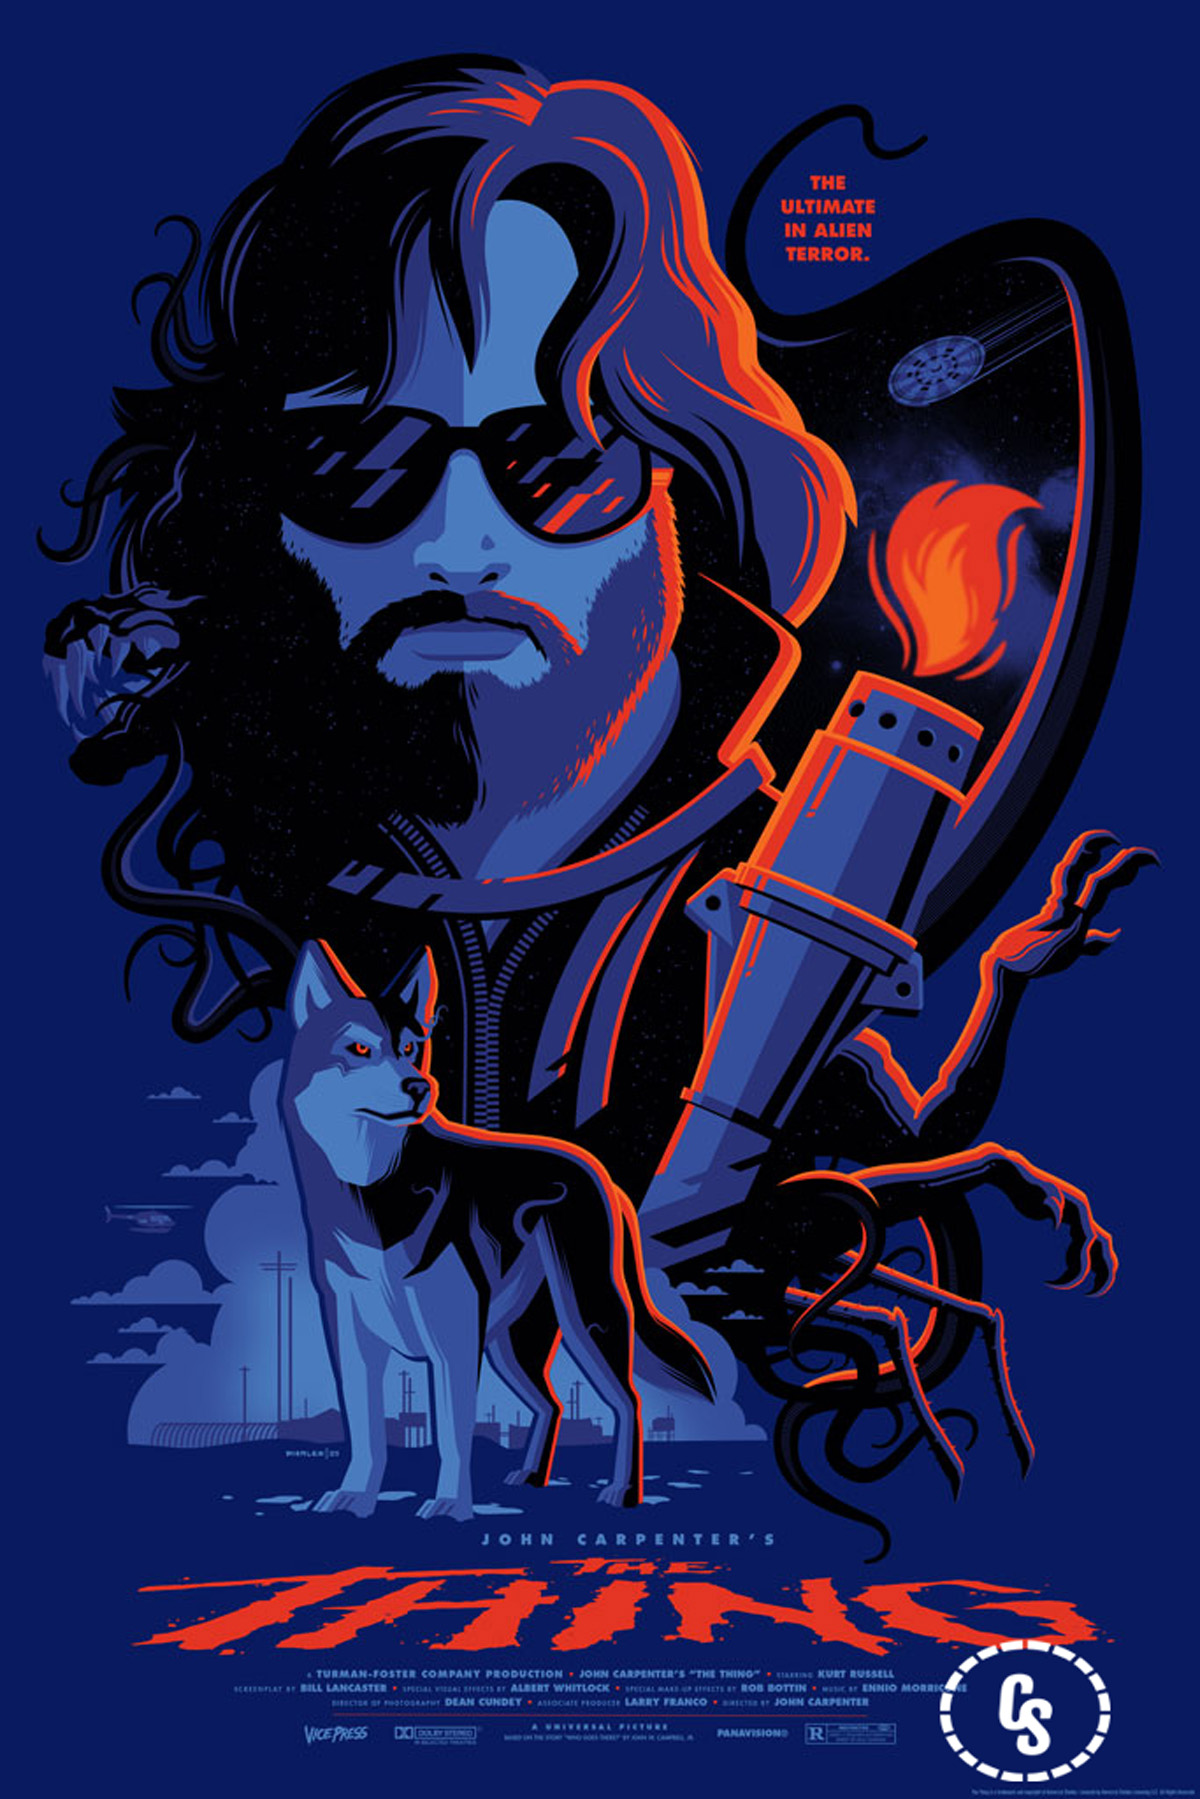 Tom Whalen, The Thing (variant)